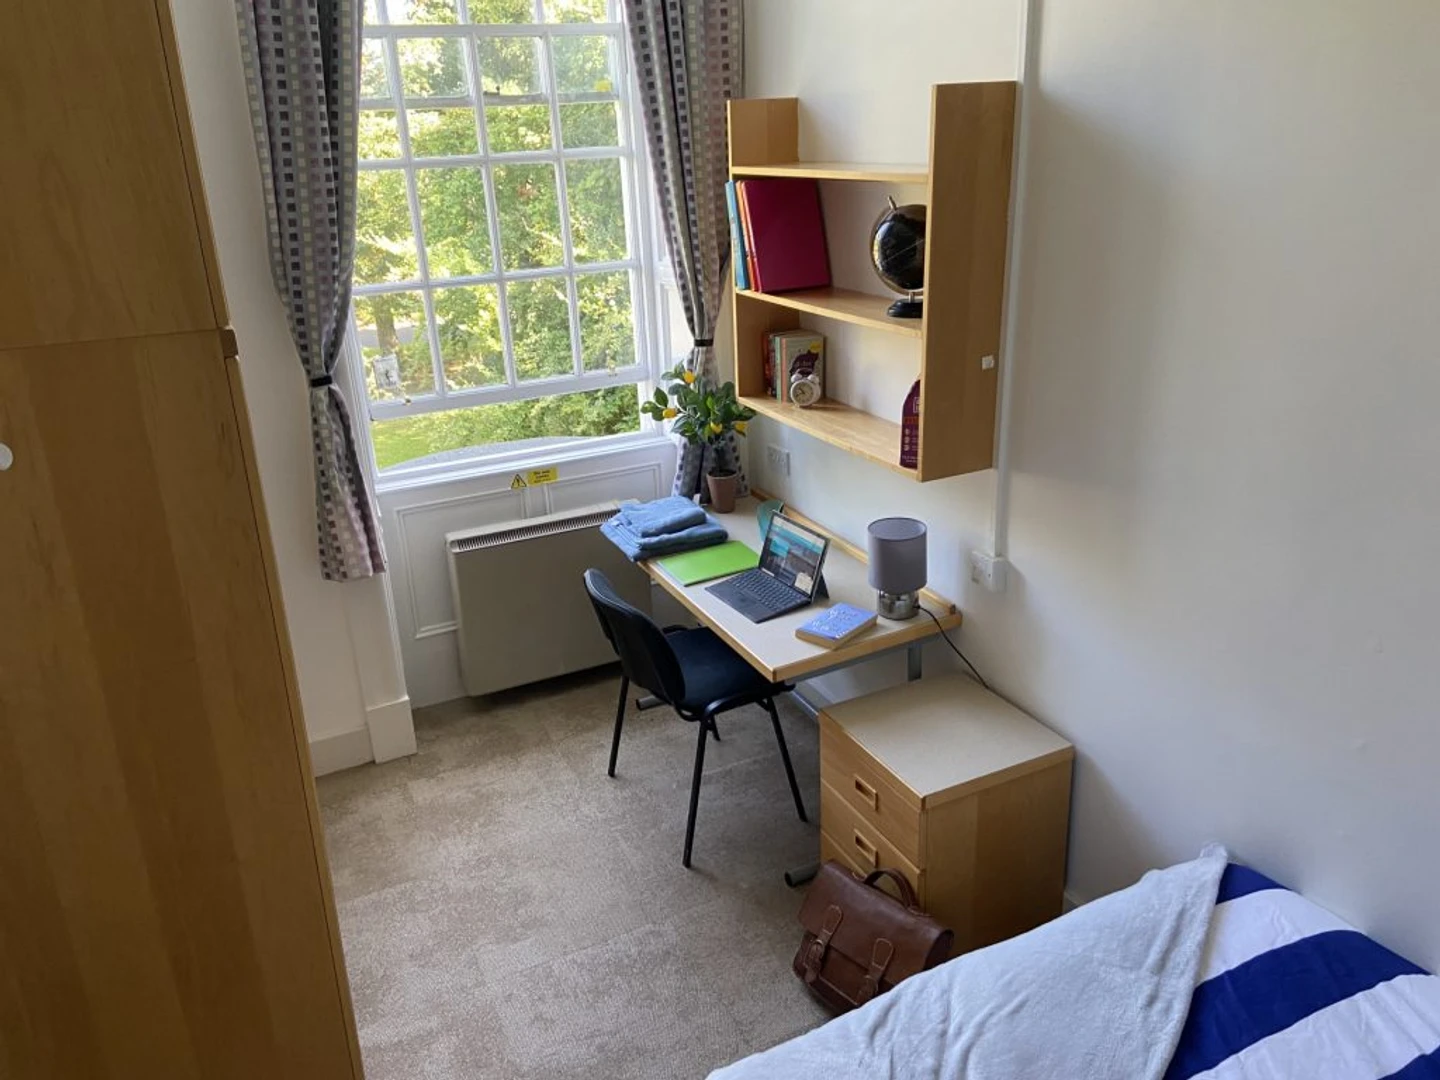 Two bedroom accommodation in Newcastle Upon Tyne